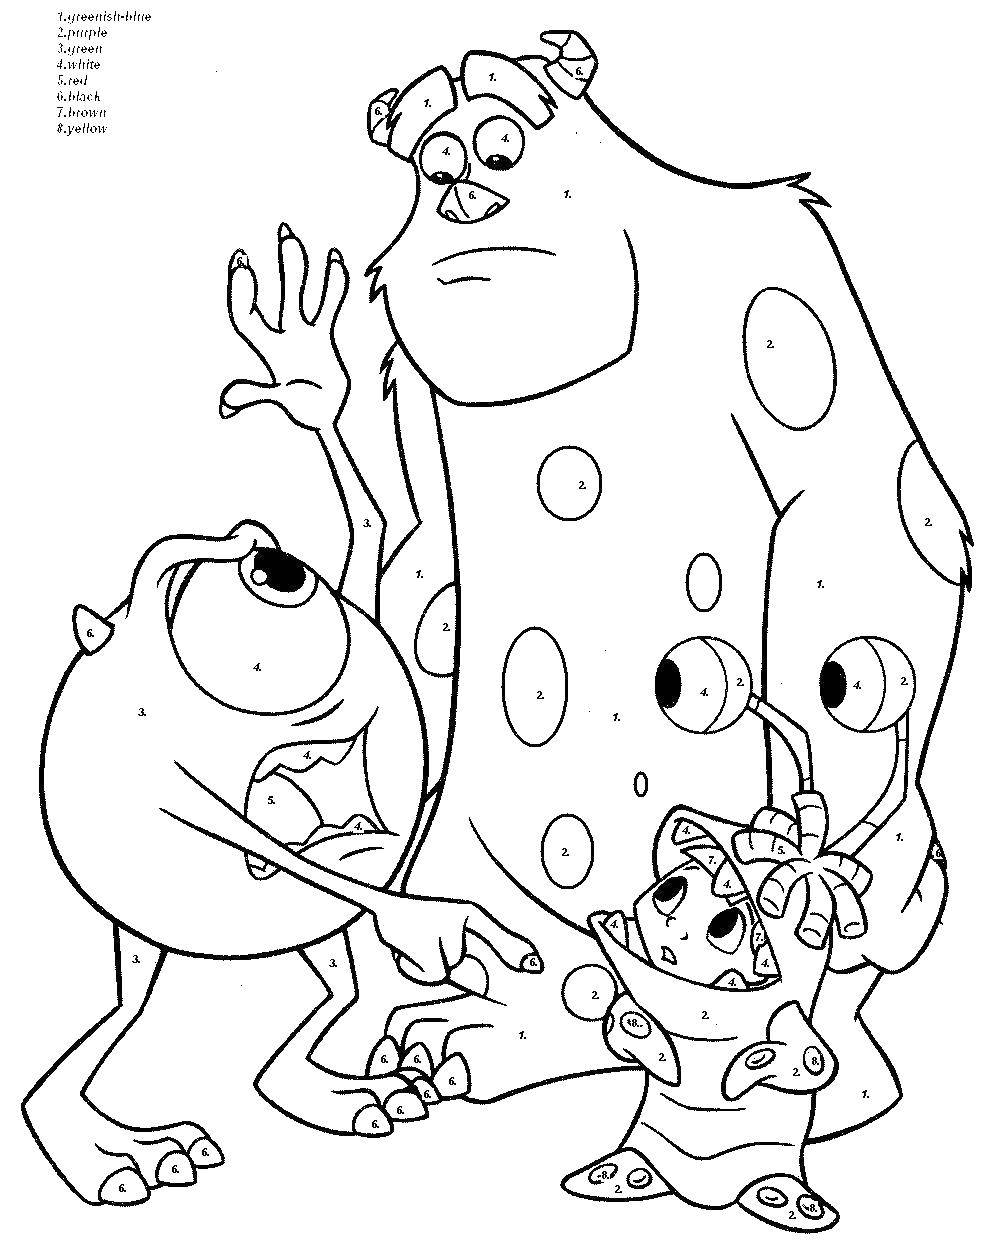 Coloring Mike and Sulley with Boo. Category Disney coloring pages. Tags:  Monsters Inc., cartoon.